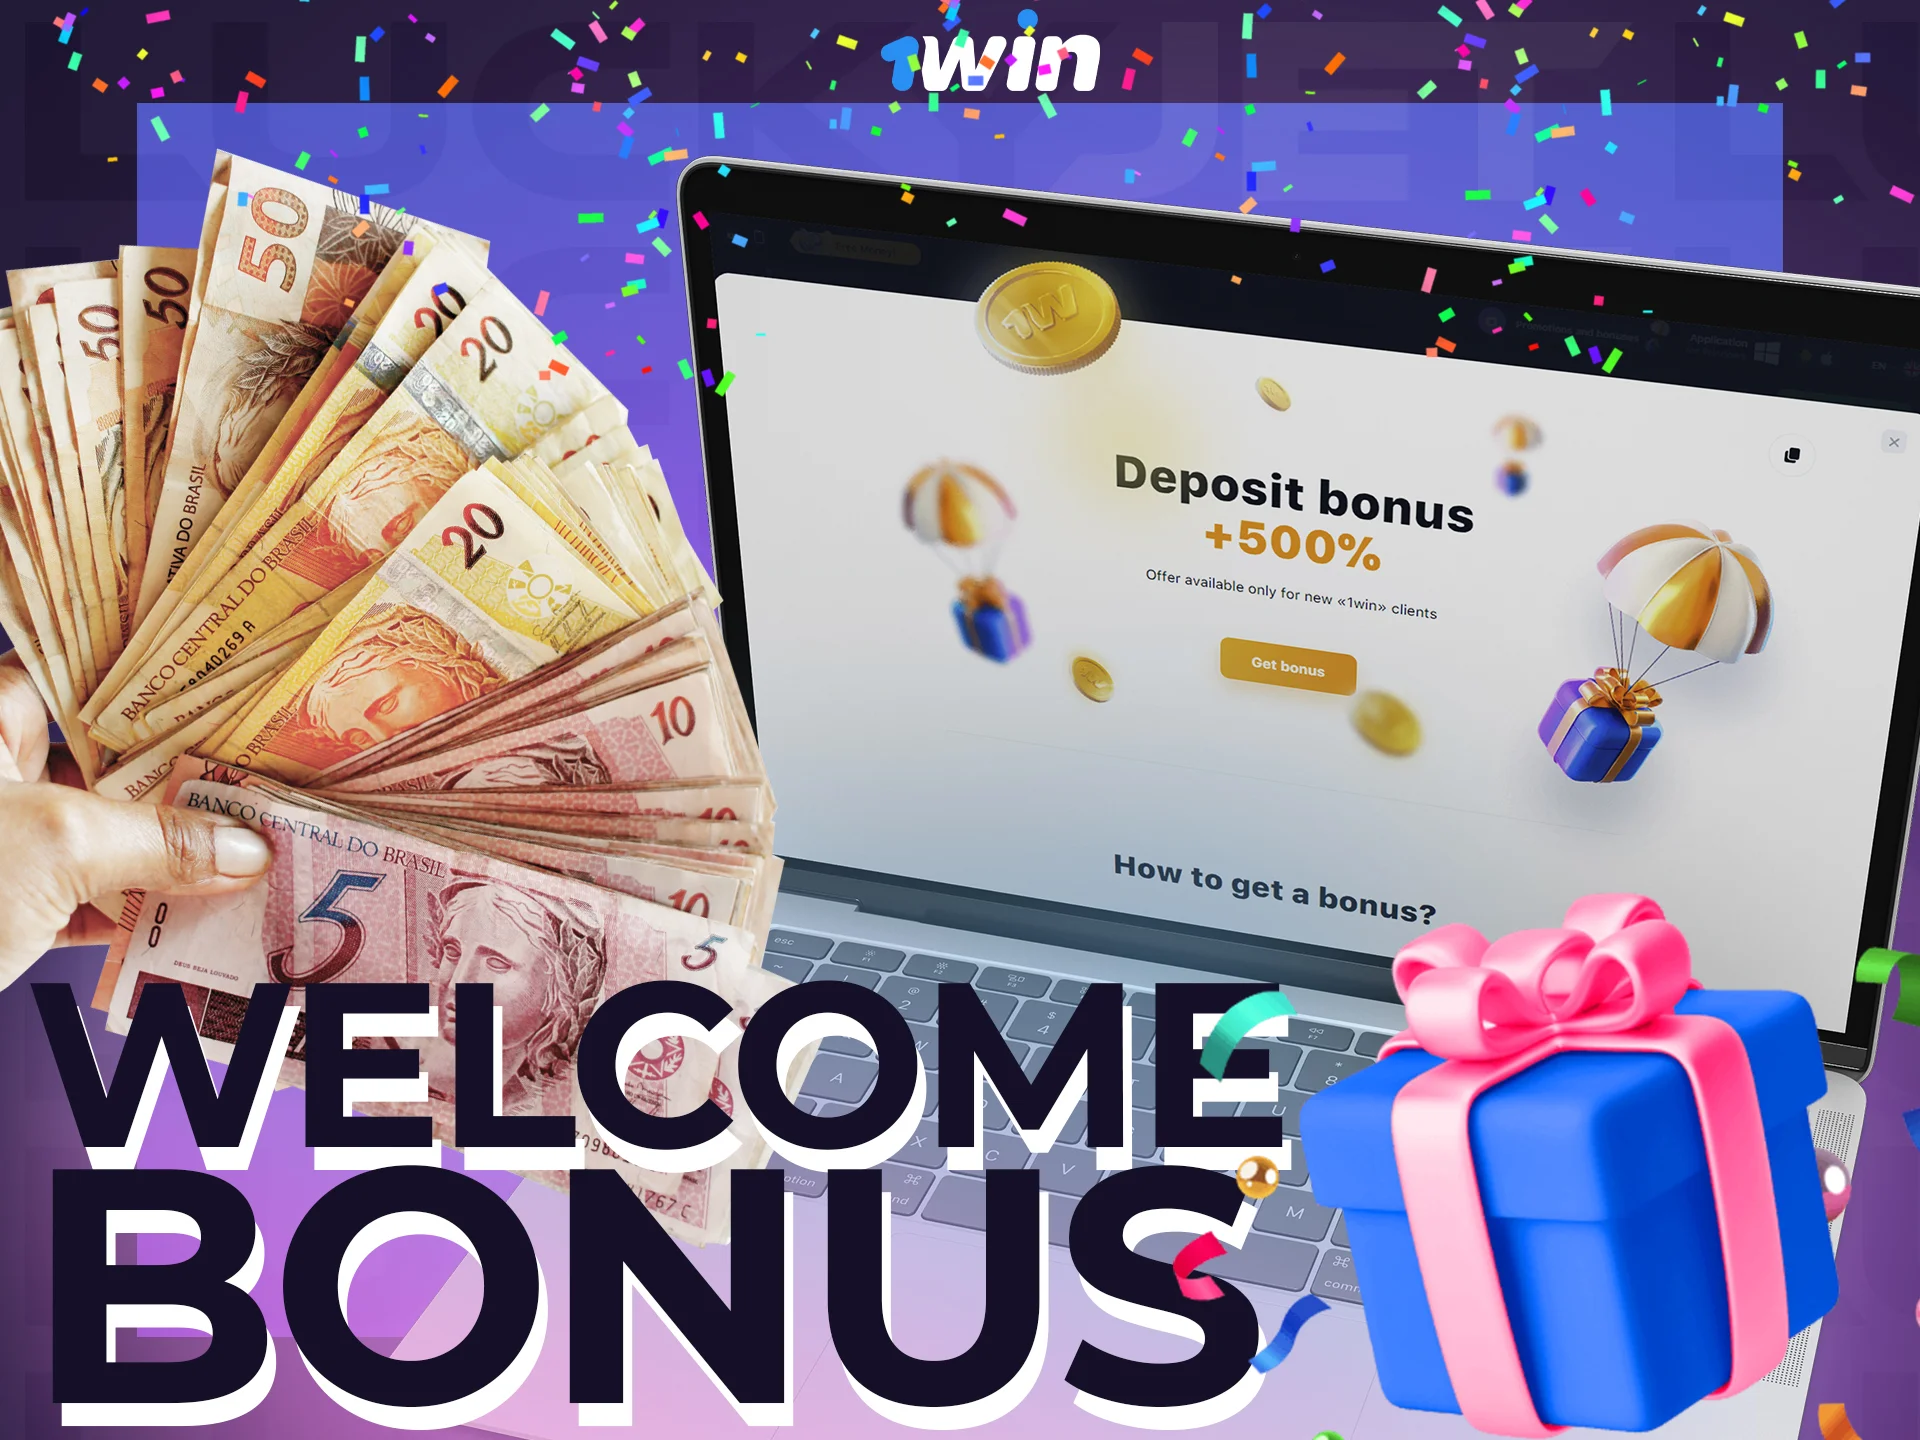 Be sure to get your special welcome bonus at 1win.